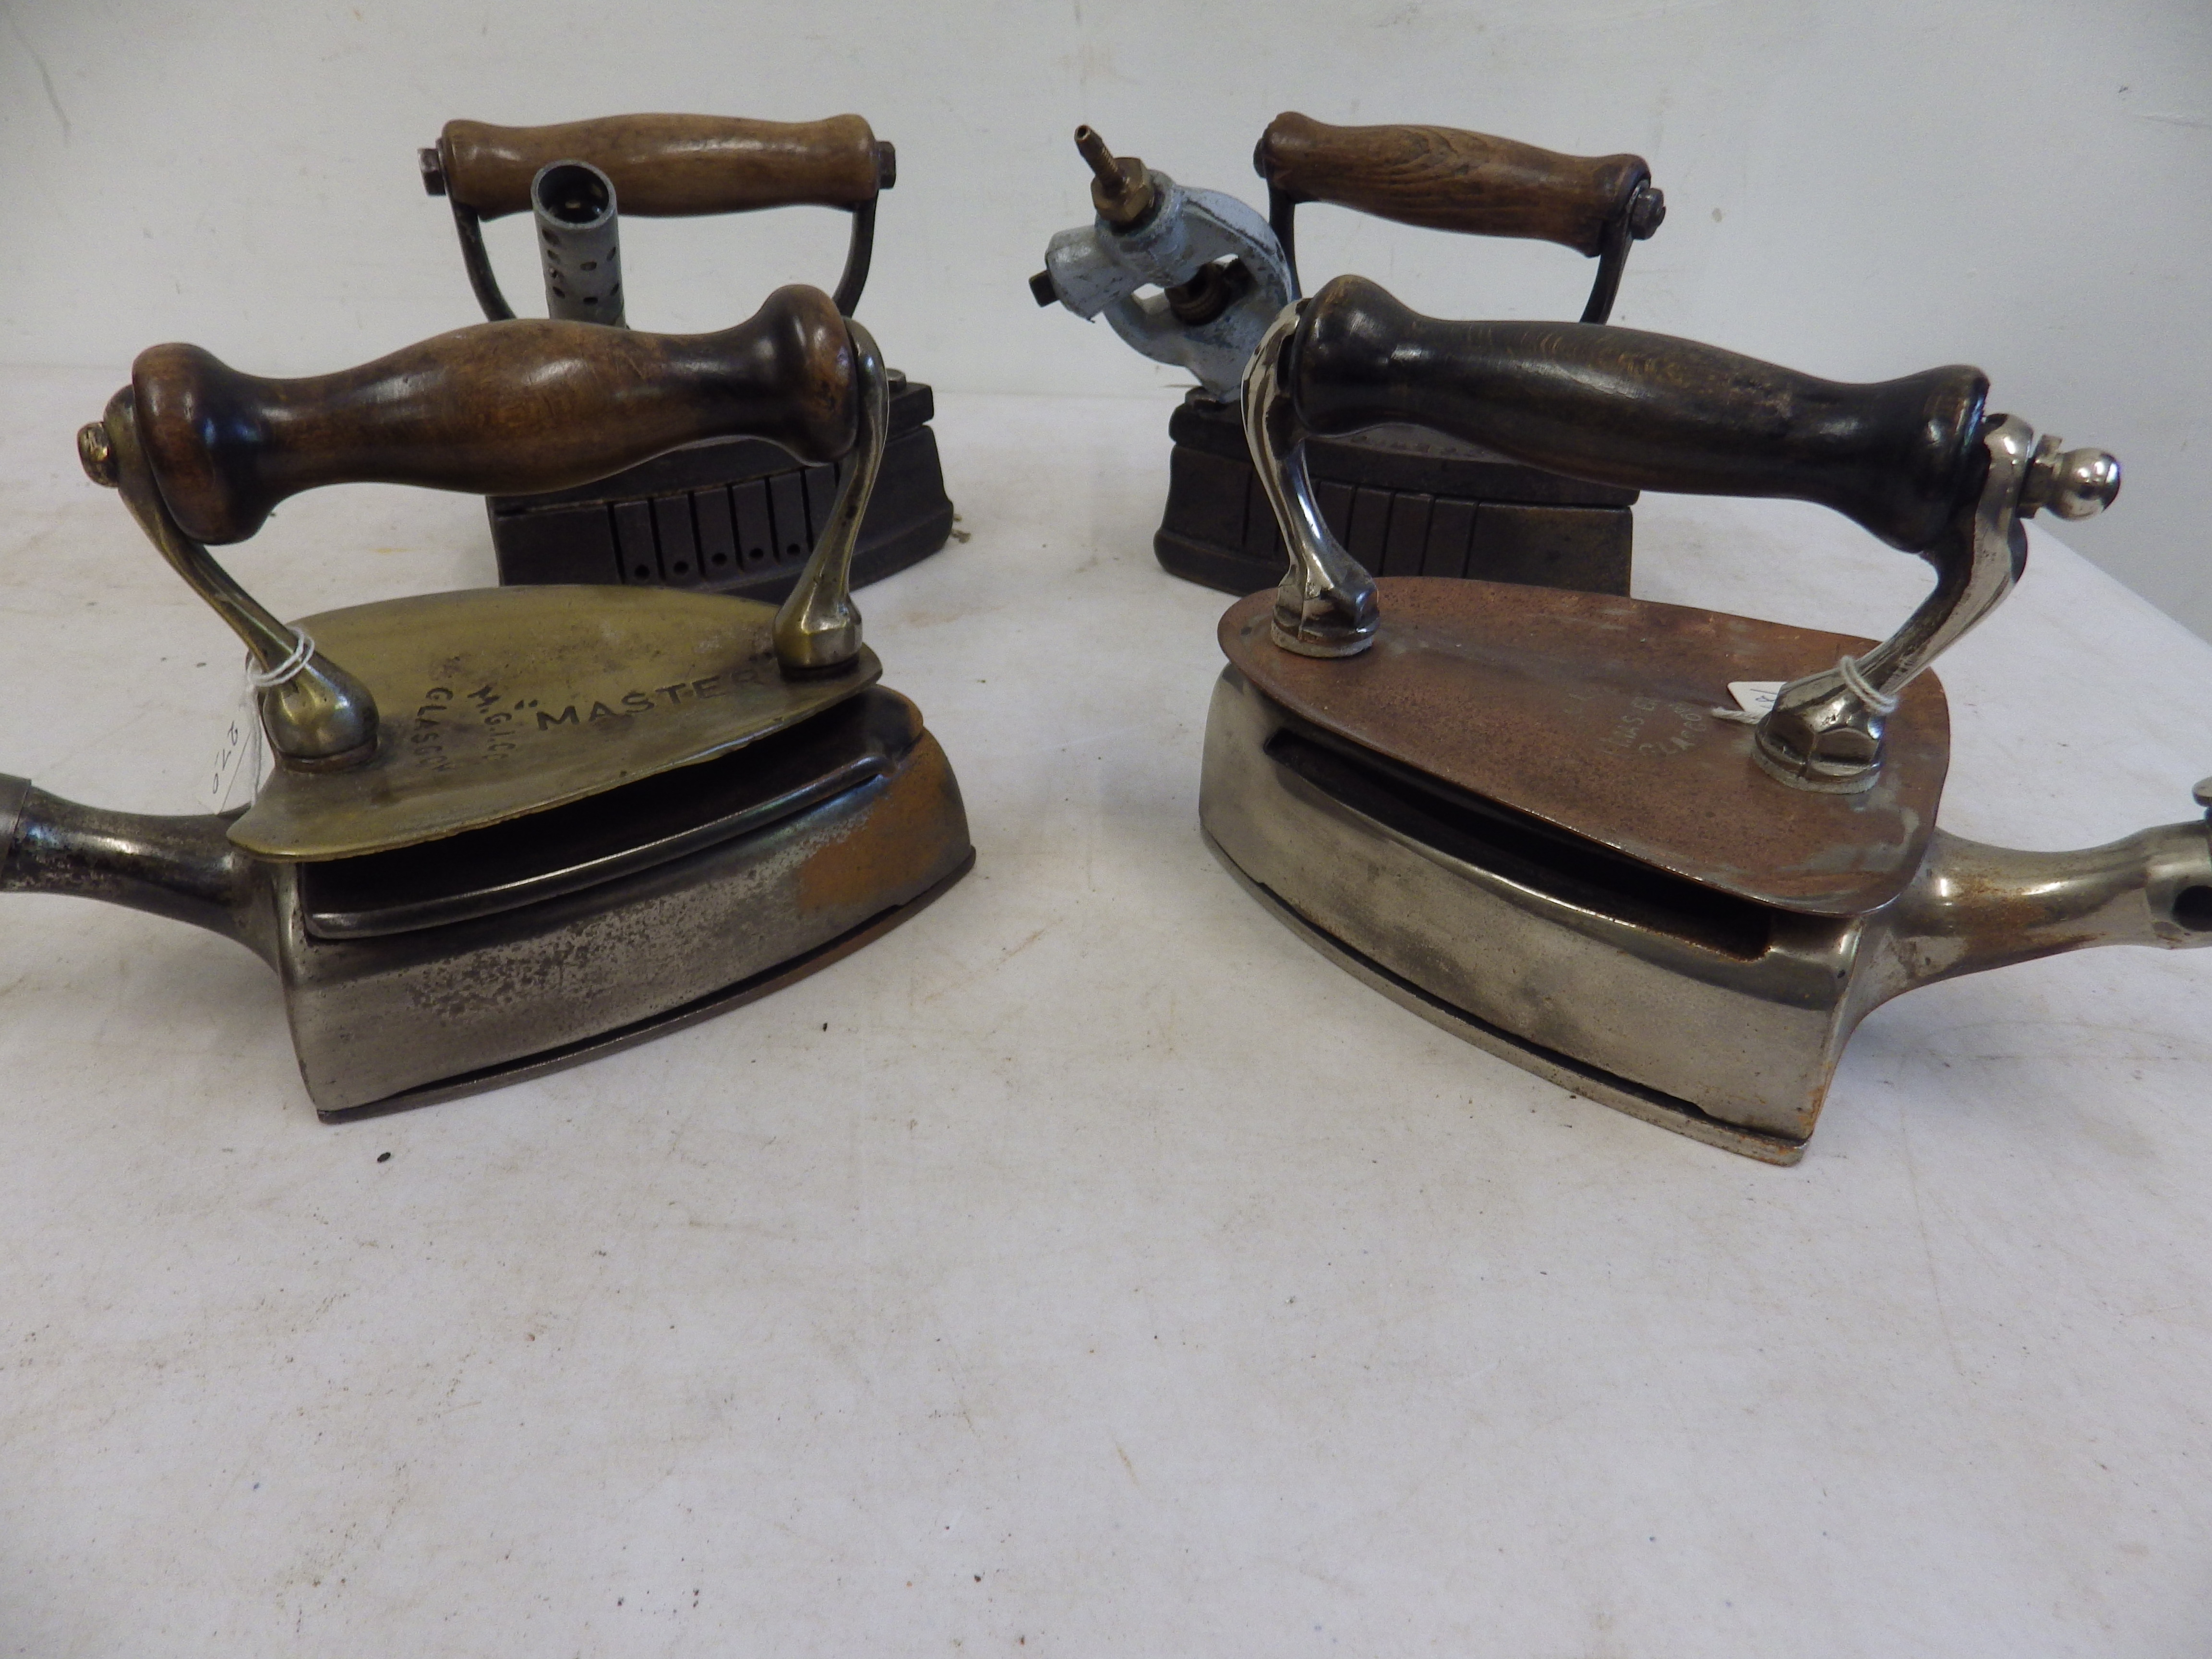 2 M G I Co Glasgow Master gas irons with copper/brass heat shields together with 2 Lister Bros No. - Bild 2 aus 6